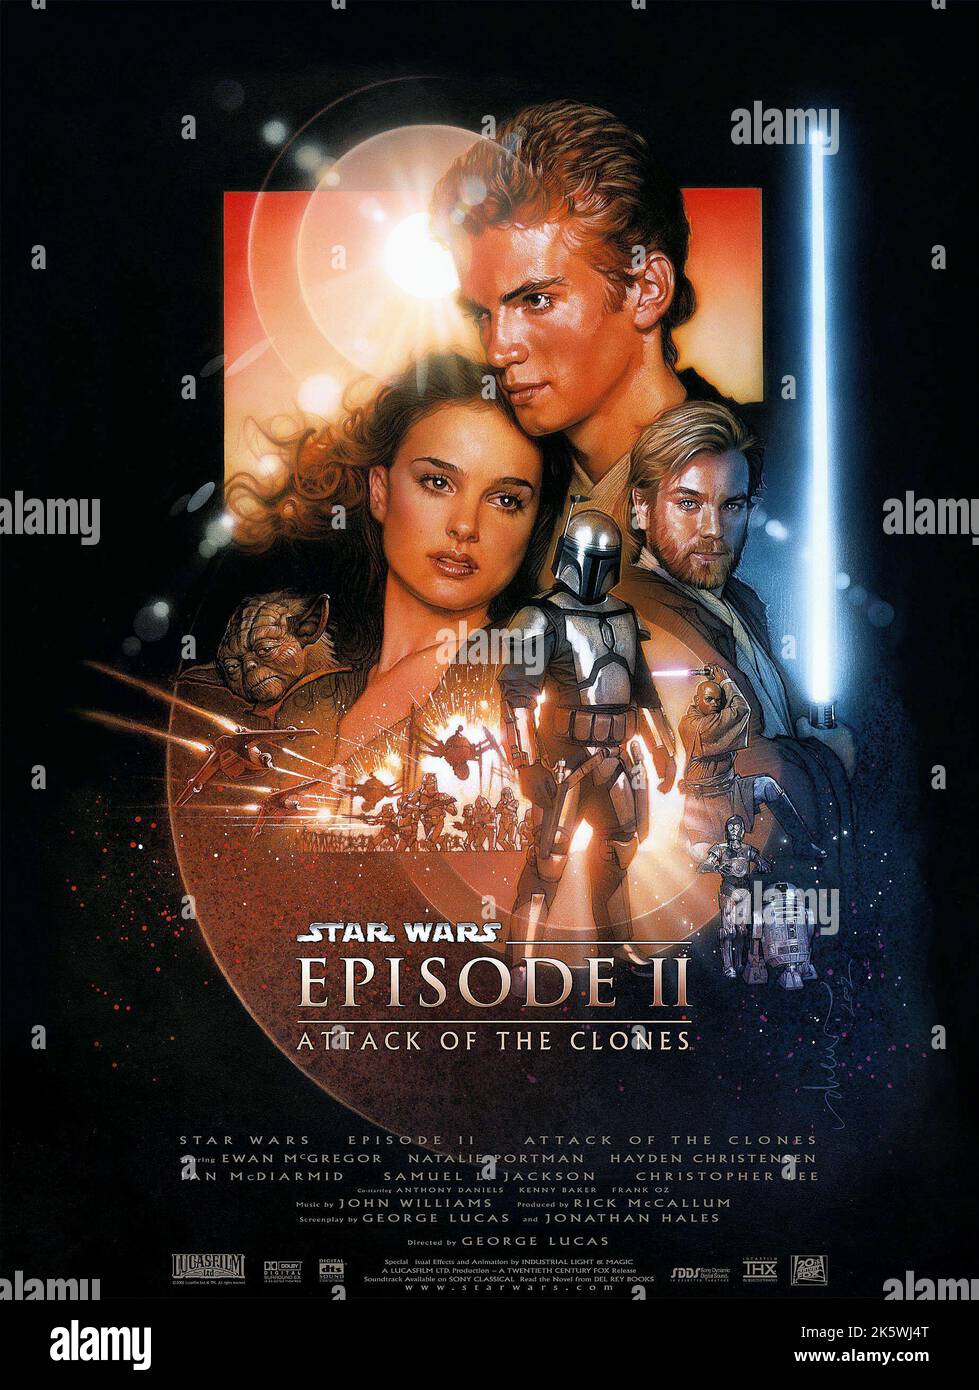 Star Wars: Episode II - Attack Of The Clones 2002 Attack Of The Clones Movie Poster Stock Photo